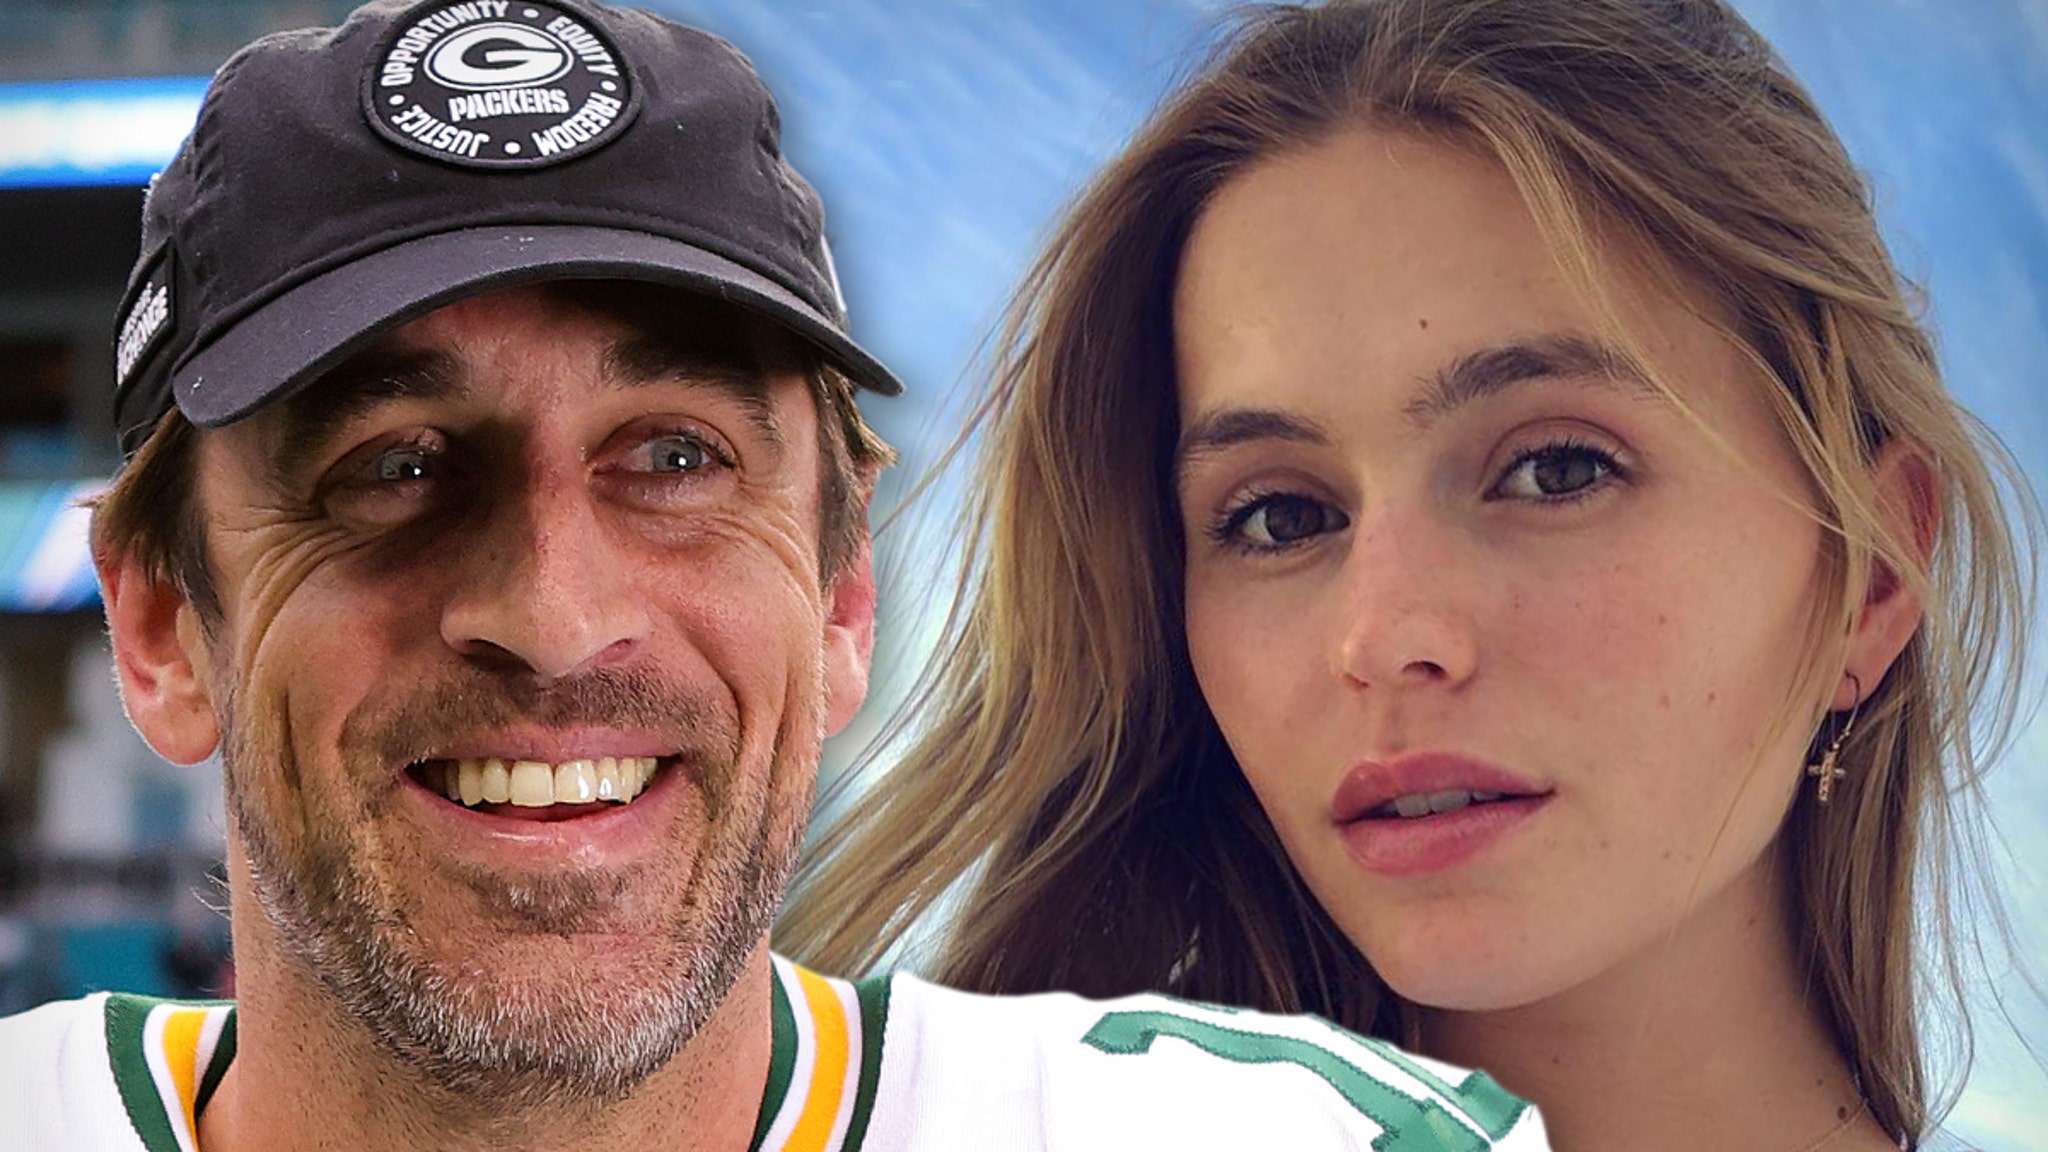 Aaron Rodgers Reportedly Dating Bucks Owner’s Daughter, Mallory Edens